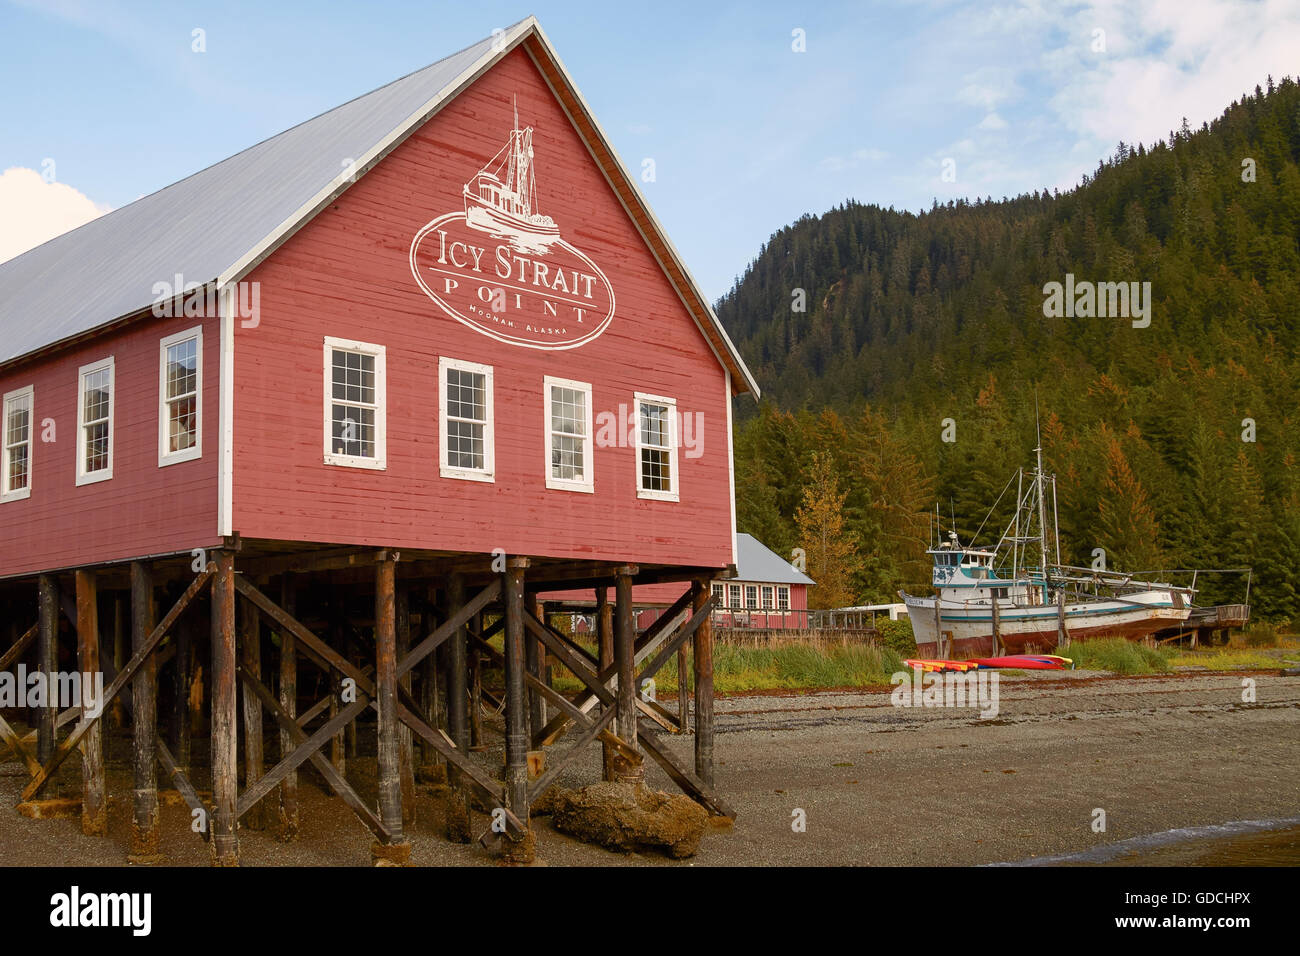 Welcome Center in Icy Strait Point Hoonah Alaska Stockfoto